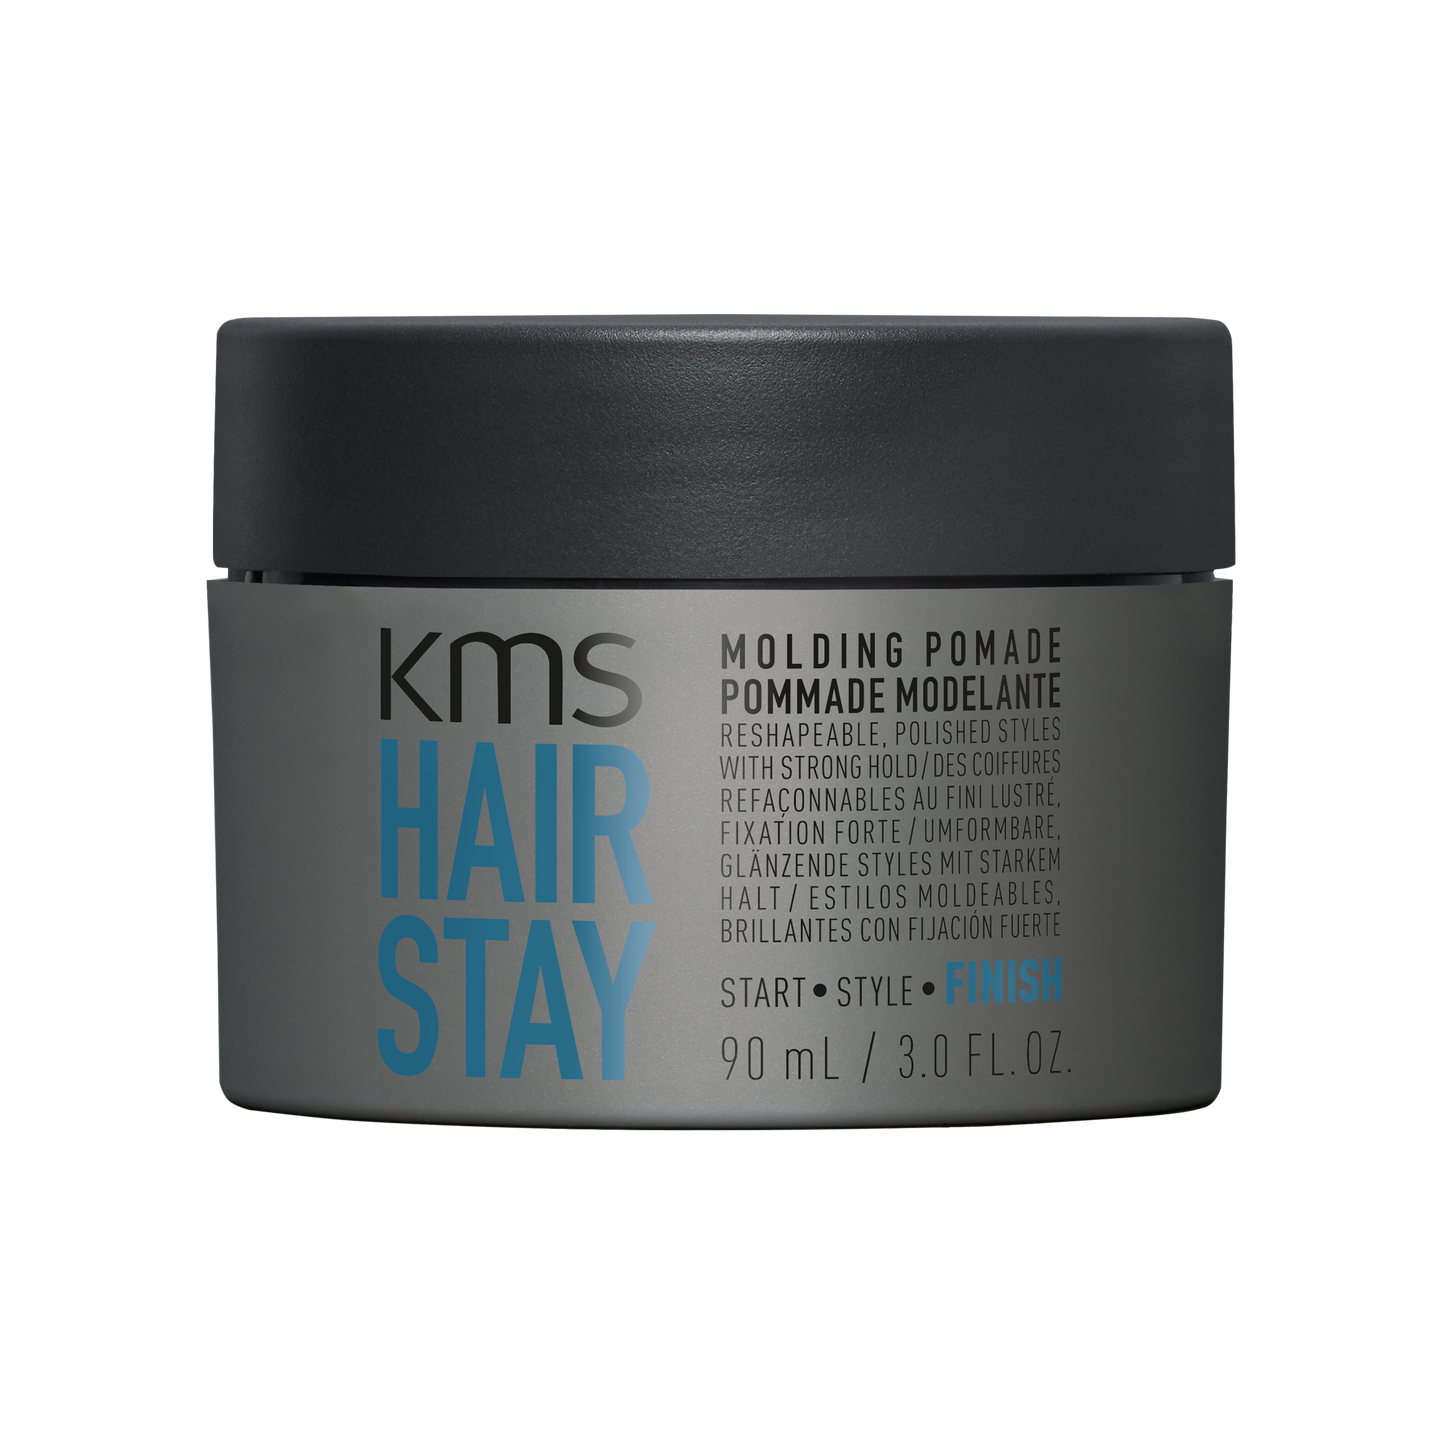 KMS HAIRSTAY Molding Pomade 90mL